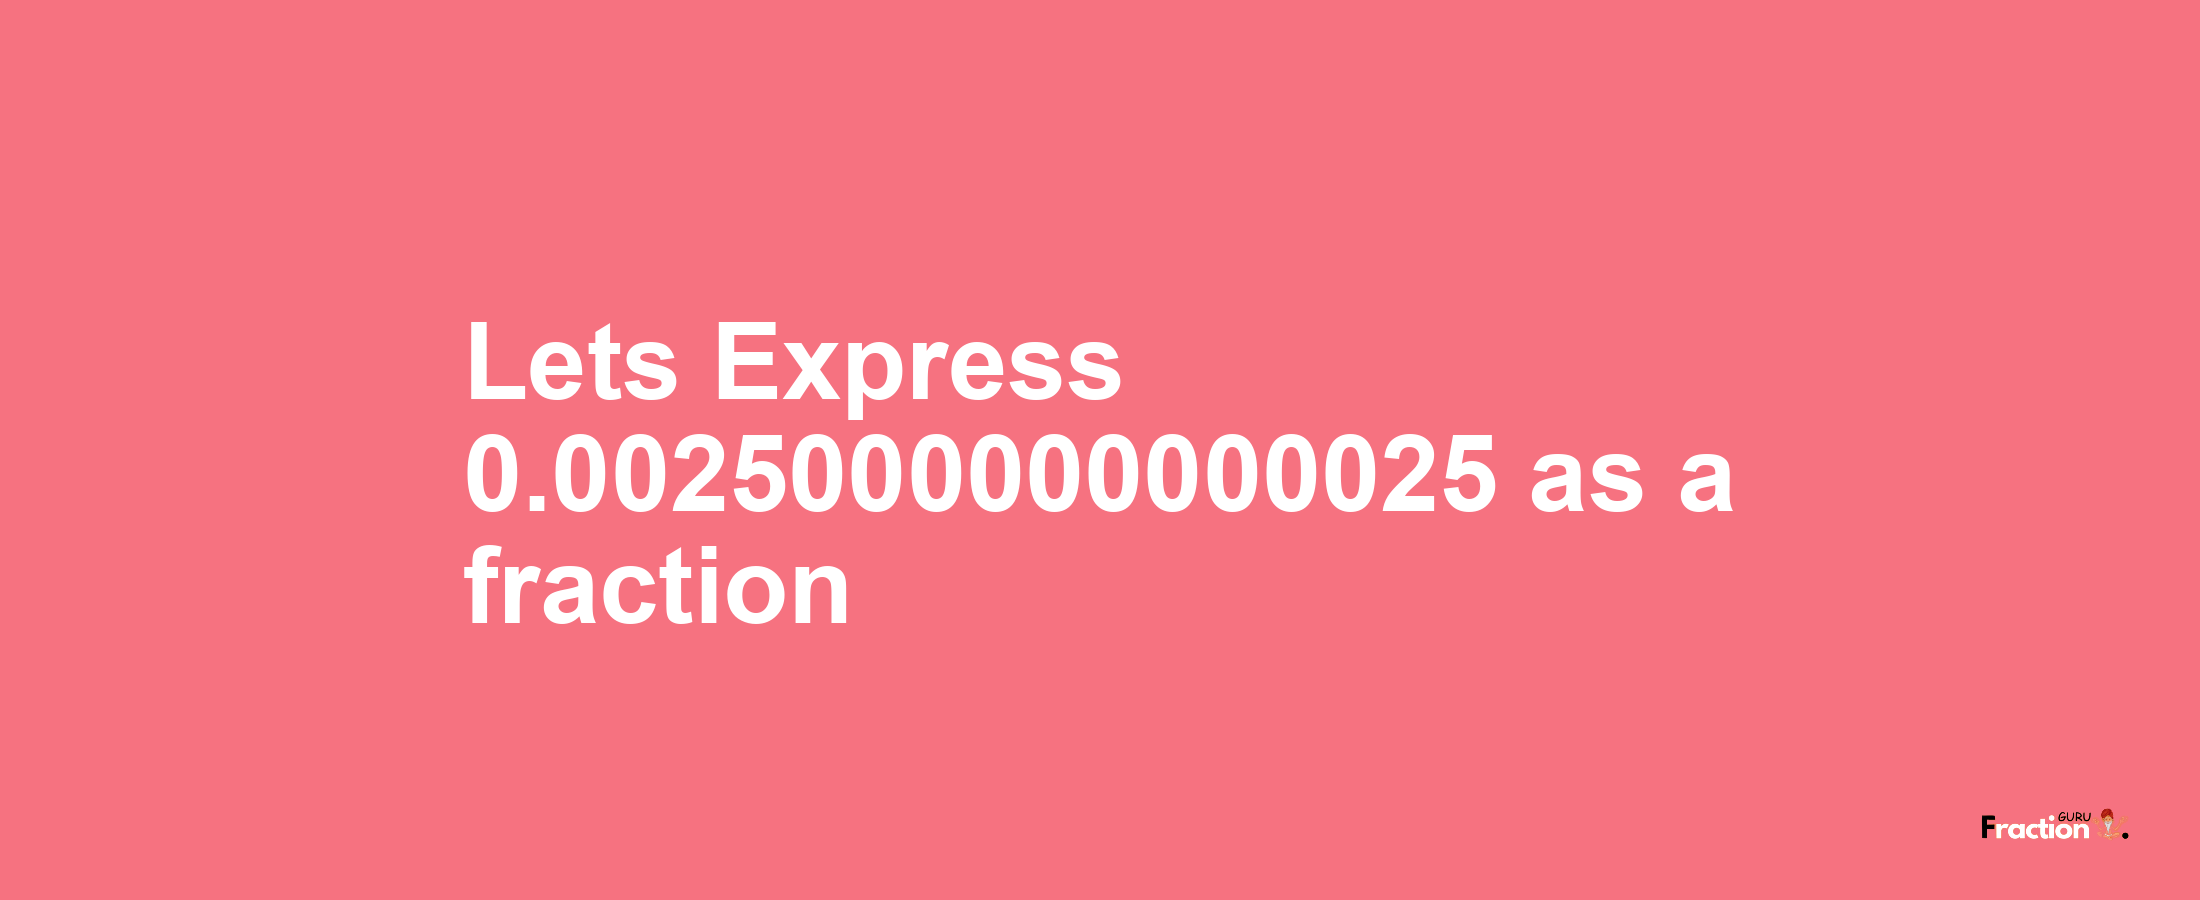 Lets Express 0.0025000000000025 as afraction